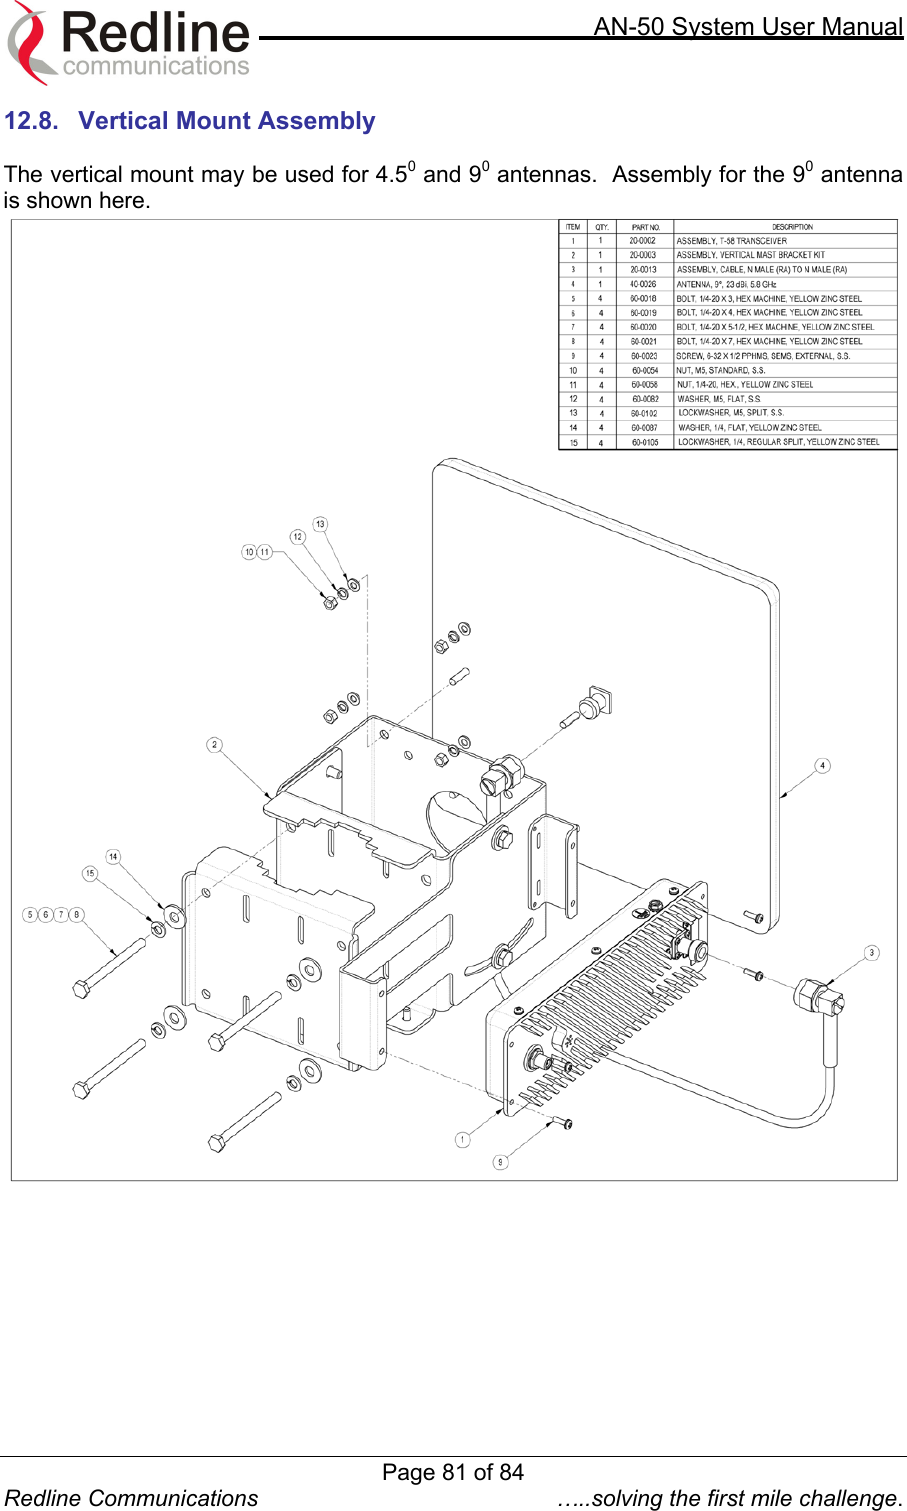     AN-50 System User Manual  Redline Communications  …..solving the first mile challenge. 12.8.  Vertical Mount Assembly  The vertical mount may be used for 4.50 and 90 antennas.  Assembly for the 90 antenna is shown here.    Page 81 of 84